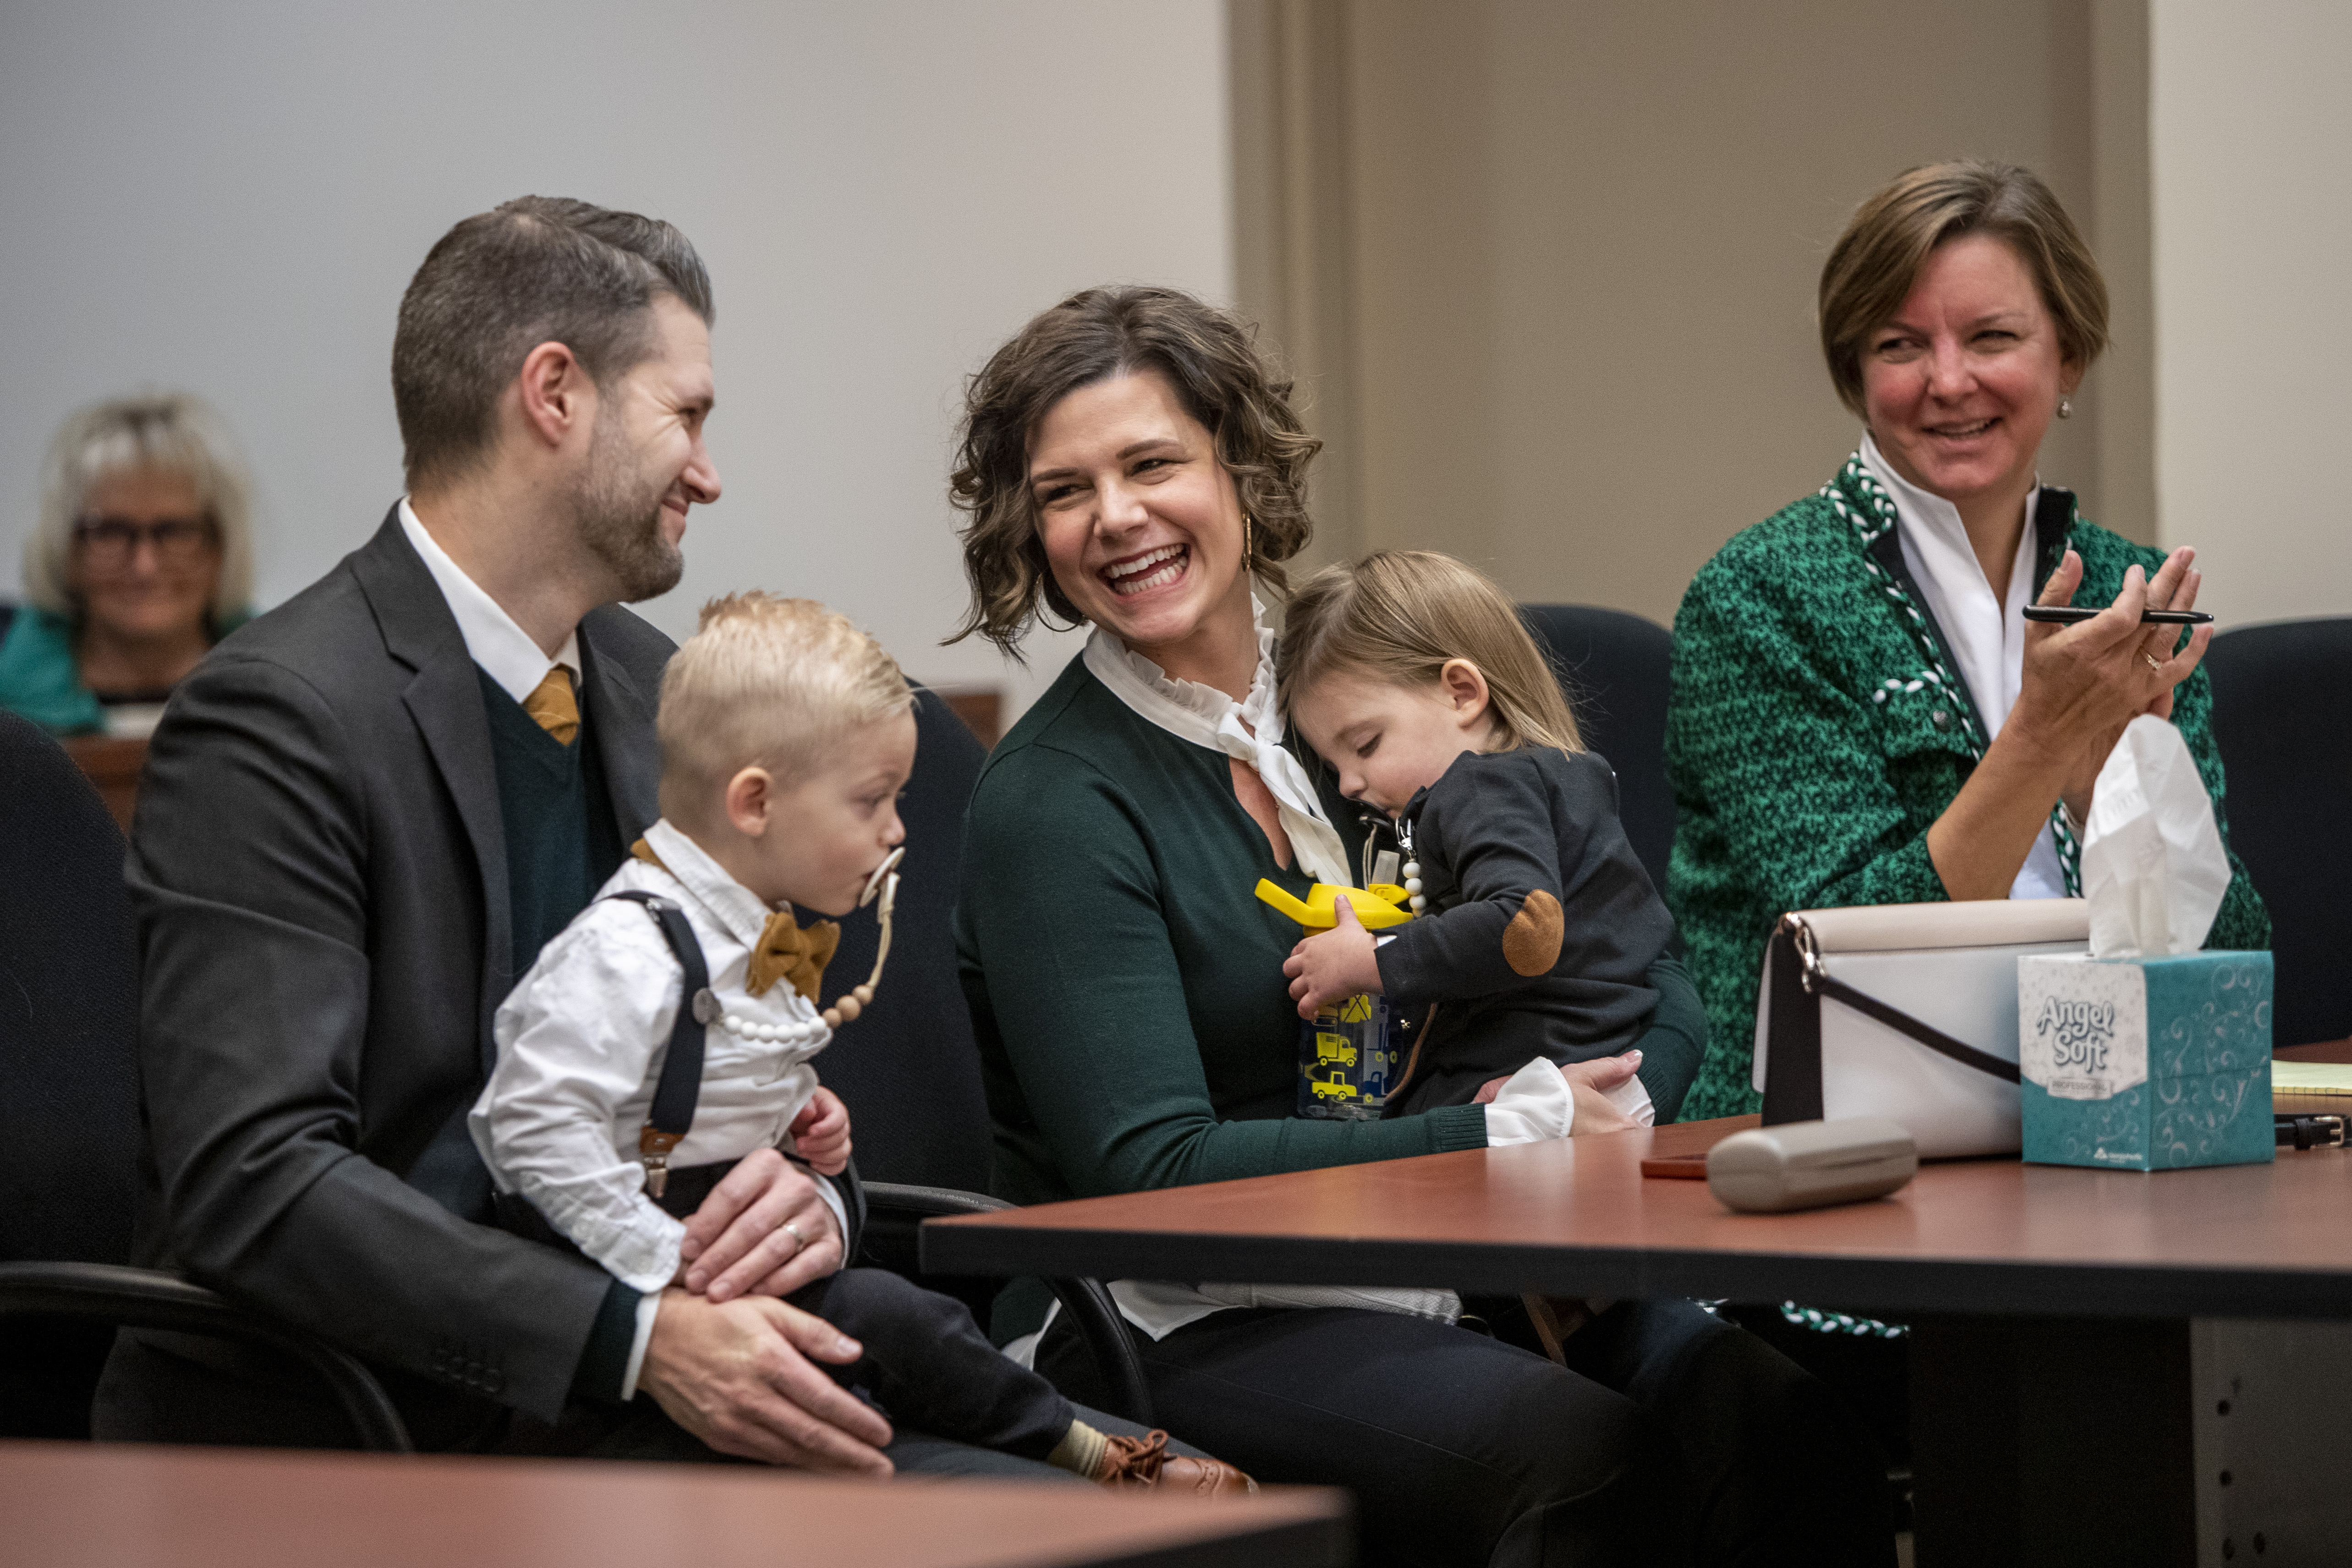 Tammy and Jordan Myers hold their twins, Eames, left, and Ellison, during Adoption Day at the Kent County Courthouse in Grand Rapids on Thursday, Dec. 8, 2022. Also pictured is their attorney, Melissa Neckers, far right. Tammy and Jordan are the biological parents of the 1-year-old twins. Lauren Vermilye, a surrogate, gave birth to the twins after Tammy went through breast cancer treatment and has no claim to the babies. The Myers family was able to adopt the twins after convincing the court system to grant them custody. (Cory Morse | MLive.com)